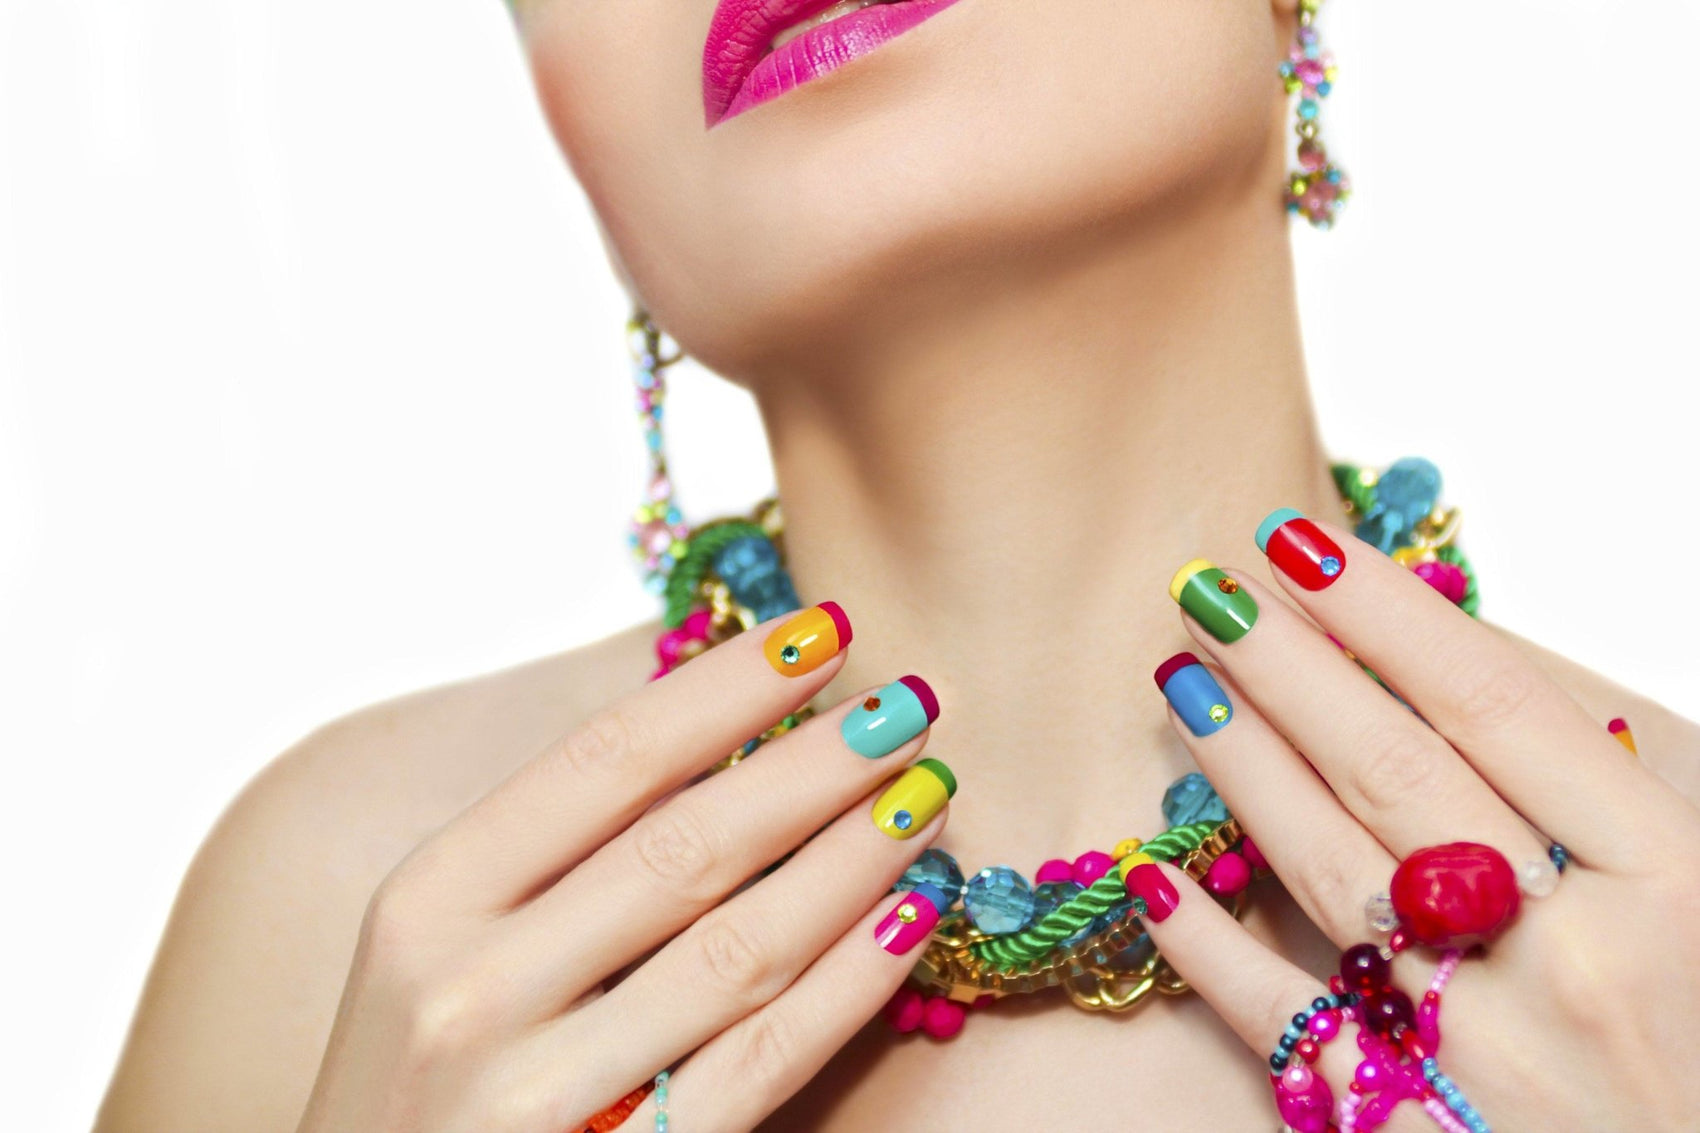 How to encourage healthy nail habits in your customers | Chroma Gel